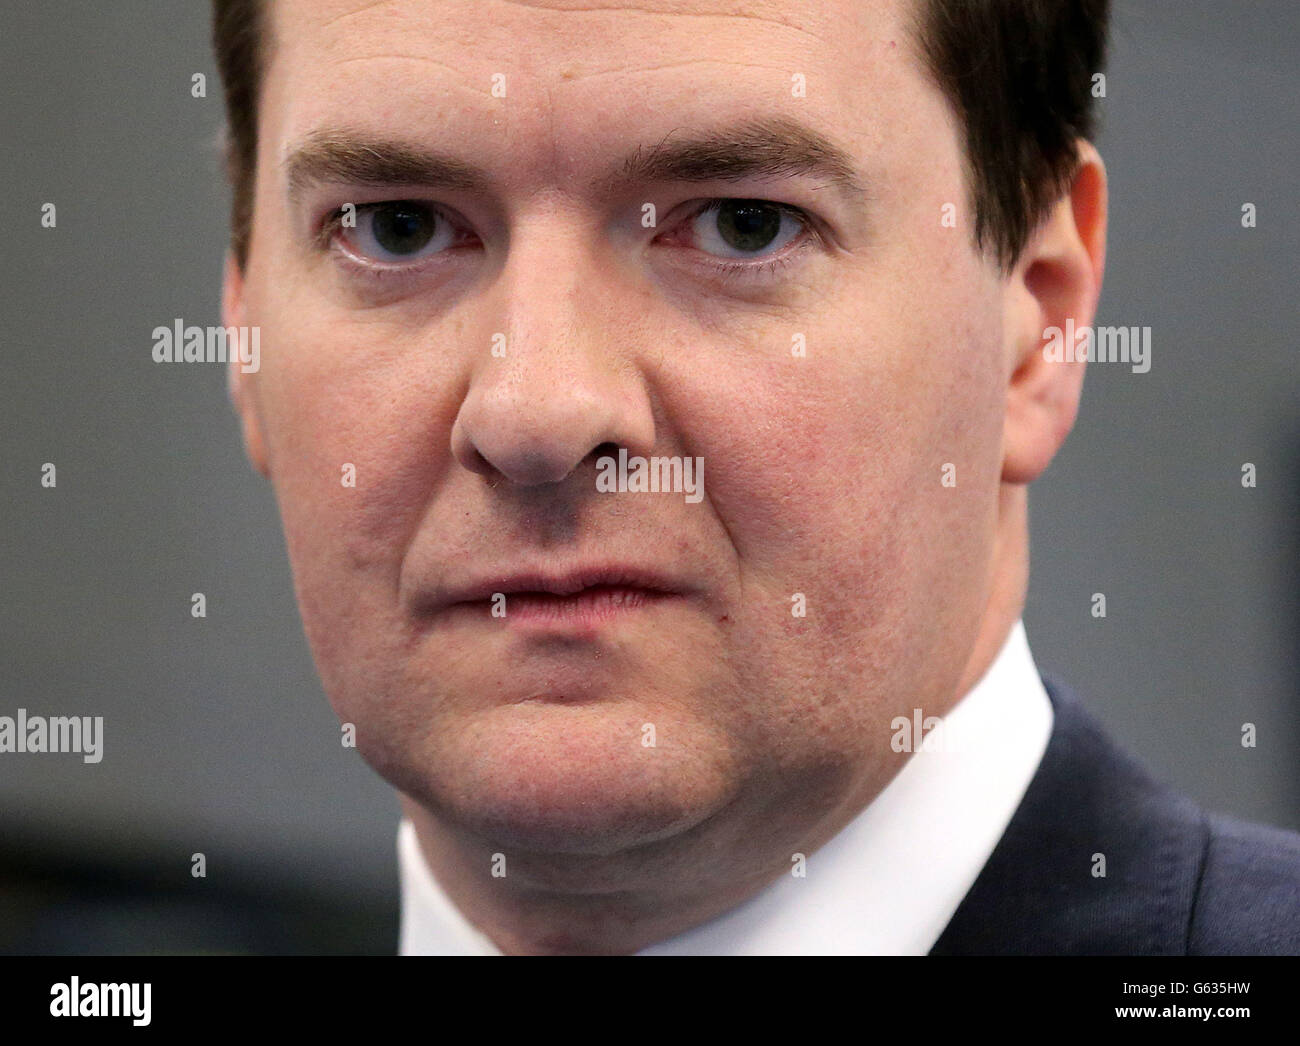 The Chancellor of the Exchequer George Osborne during a visit to the CNC milling section at Castle Precision Engineering in Glasgow after the launch of the Scotland Analysis paper on Currency and Monetary Policy in Glasgowl. Stock Photo